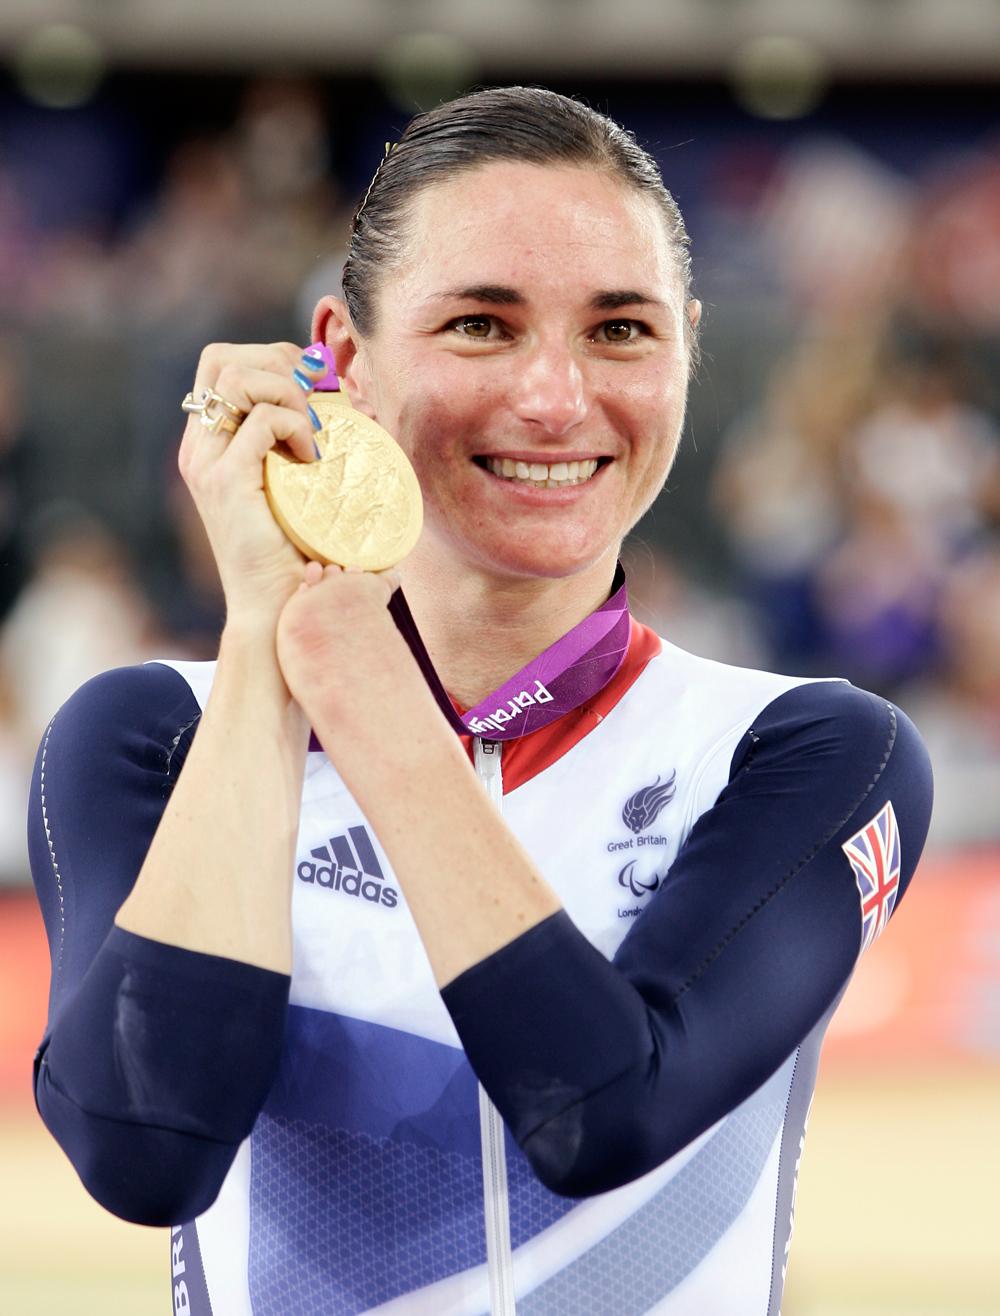 Paralympic gold medallist Sarah Storey has more than 20,000 followers on Twitter